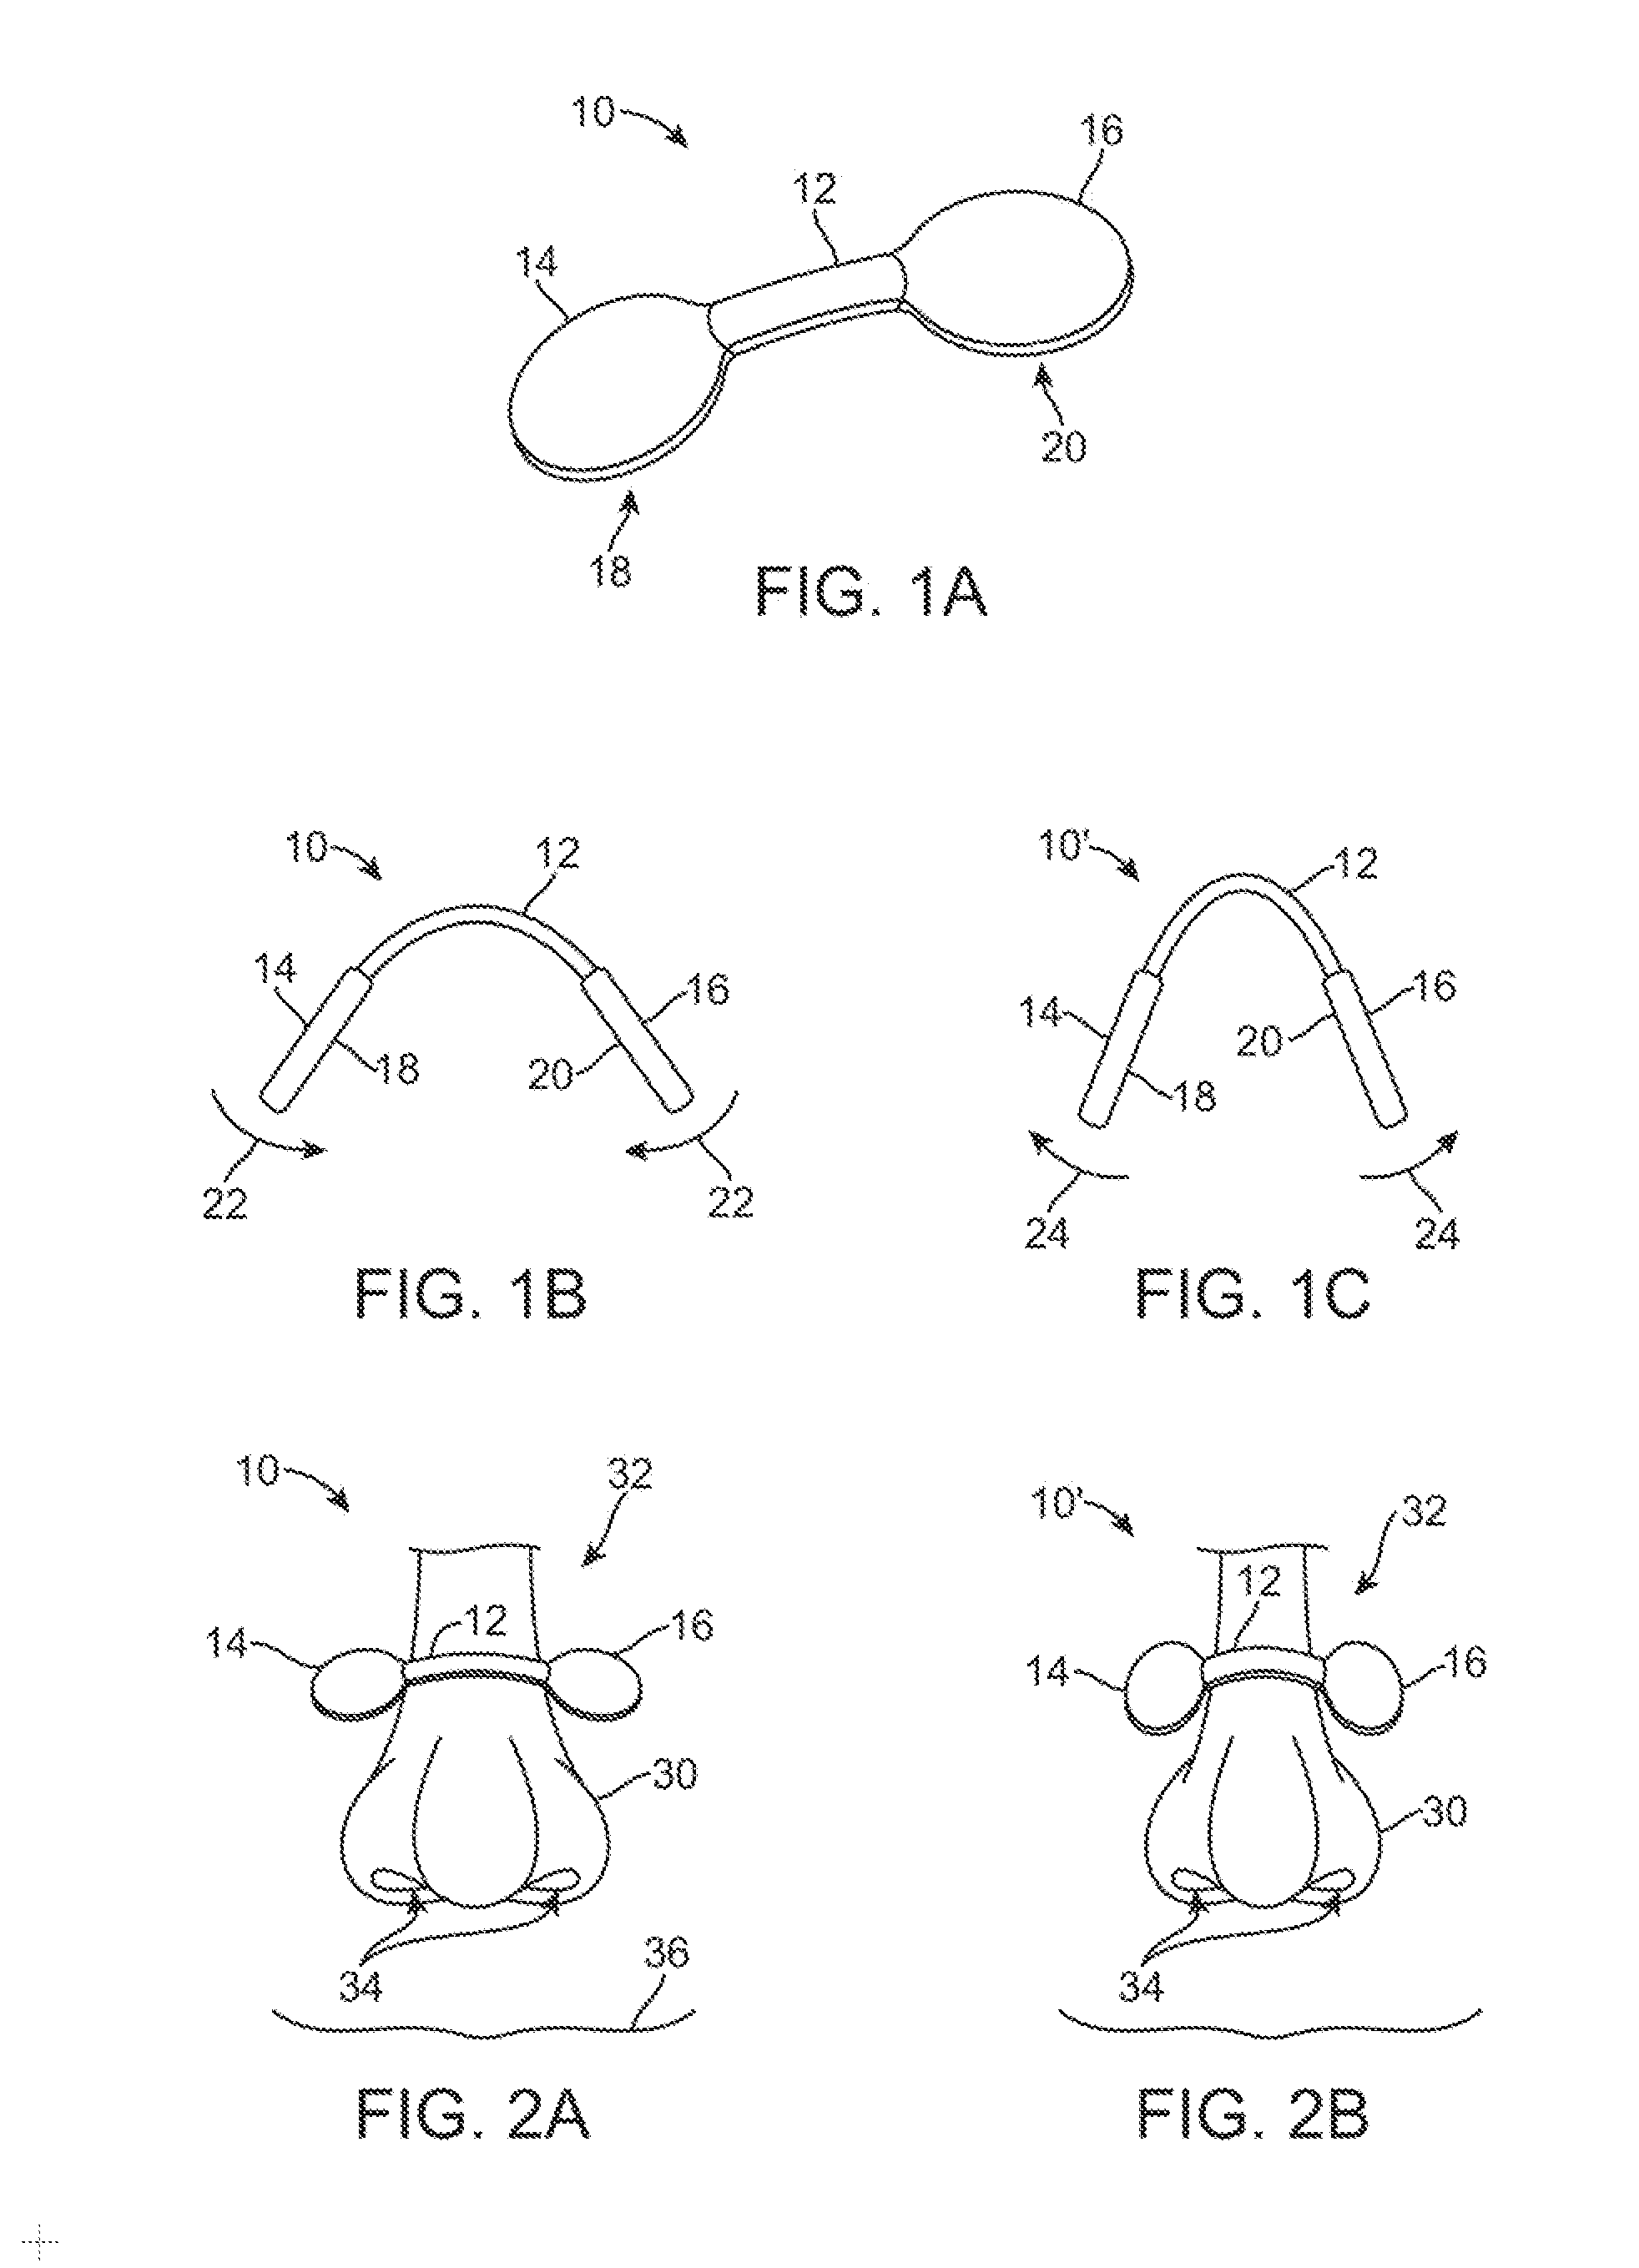 Extendable airflow restriction system